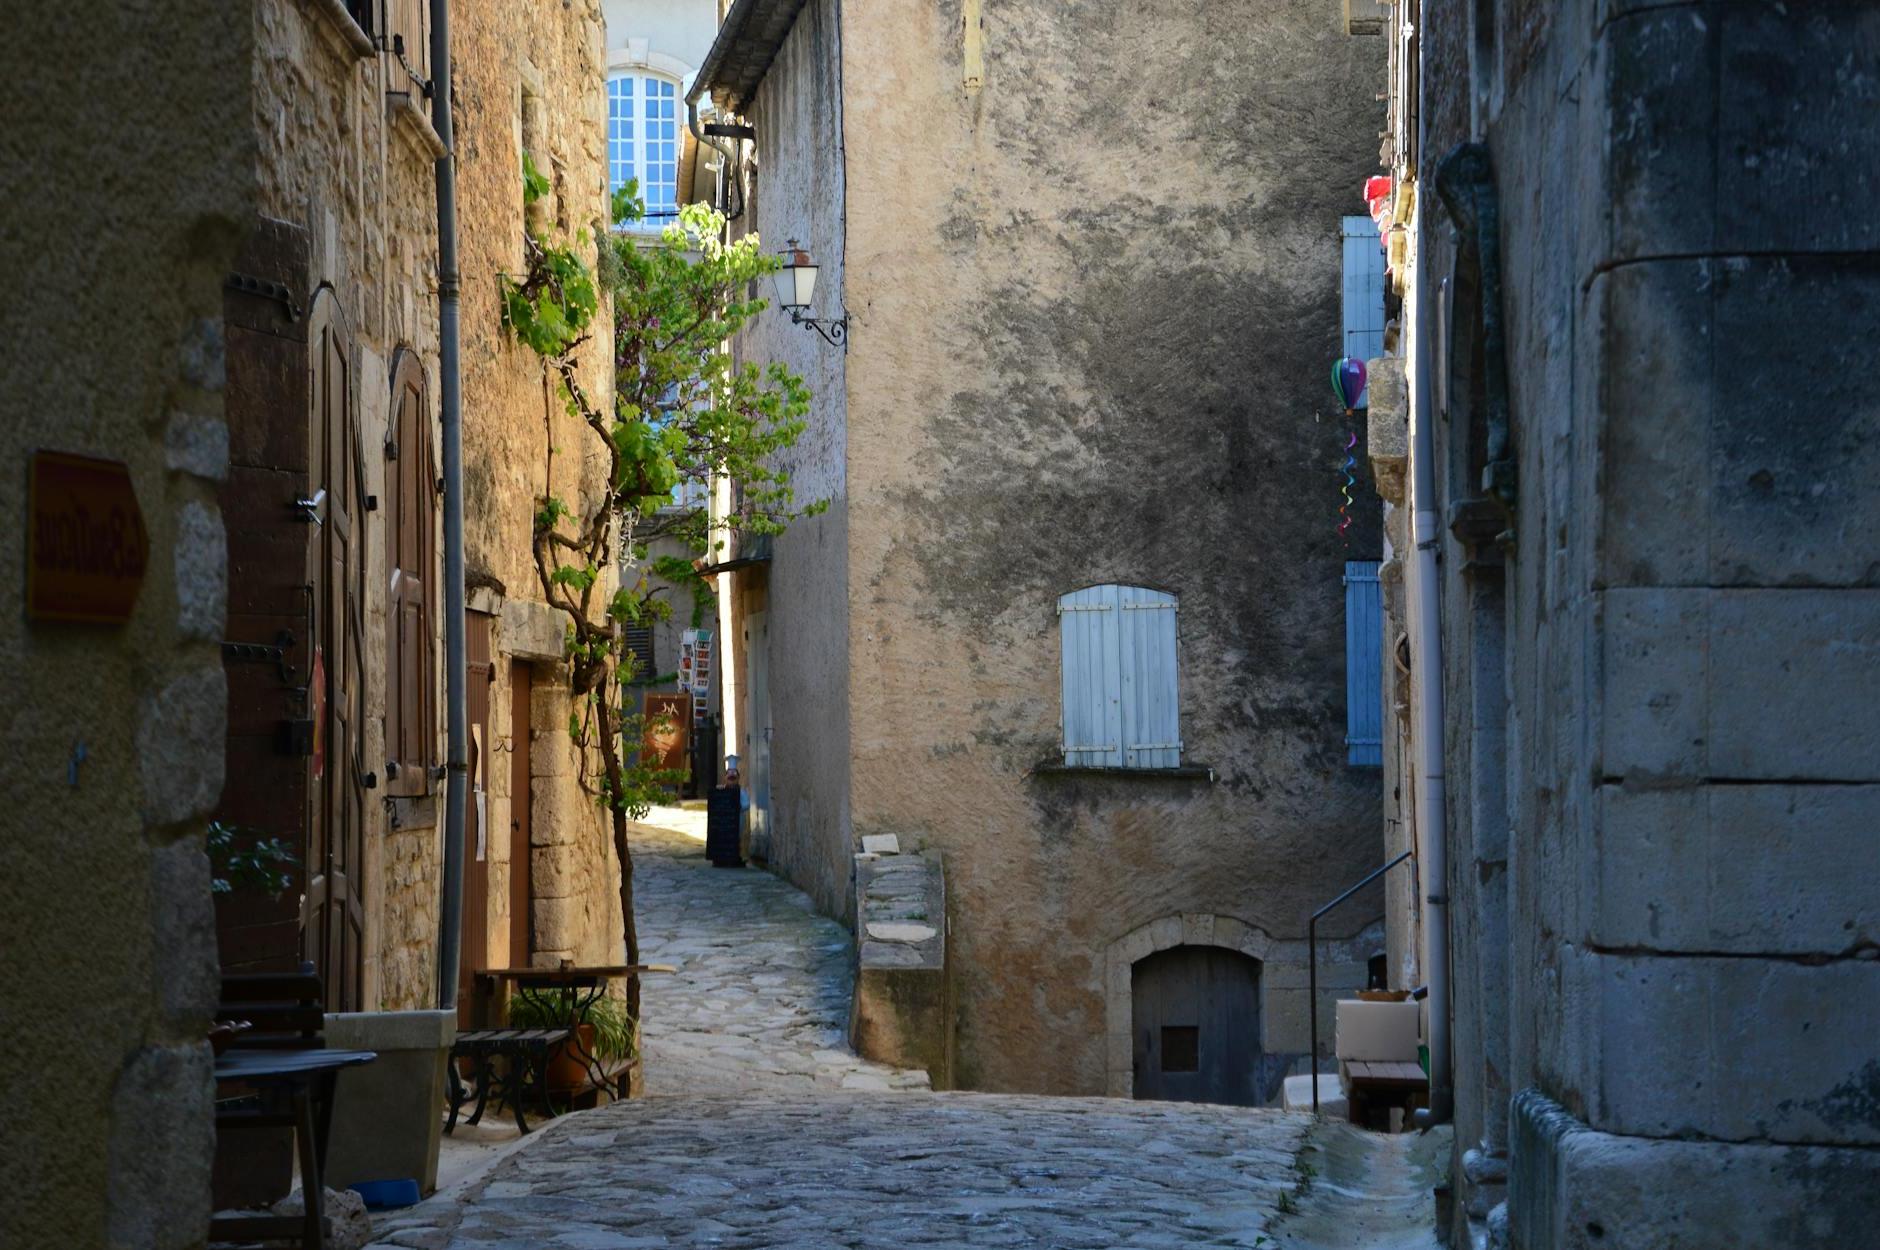 Paved Narrow Streets in Old Town